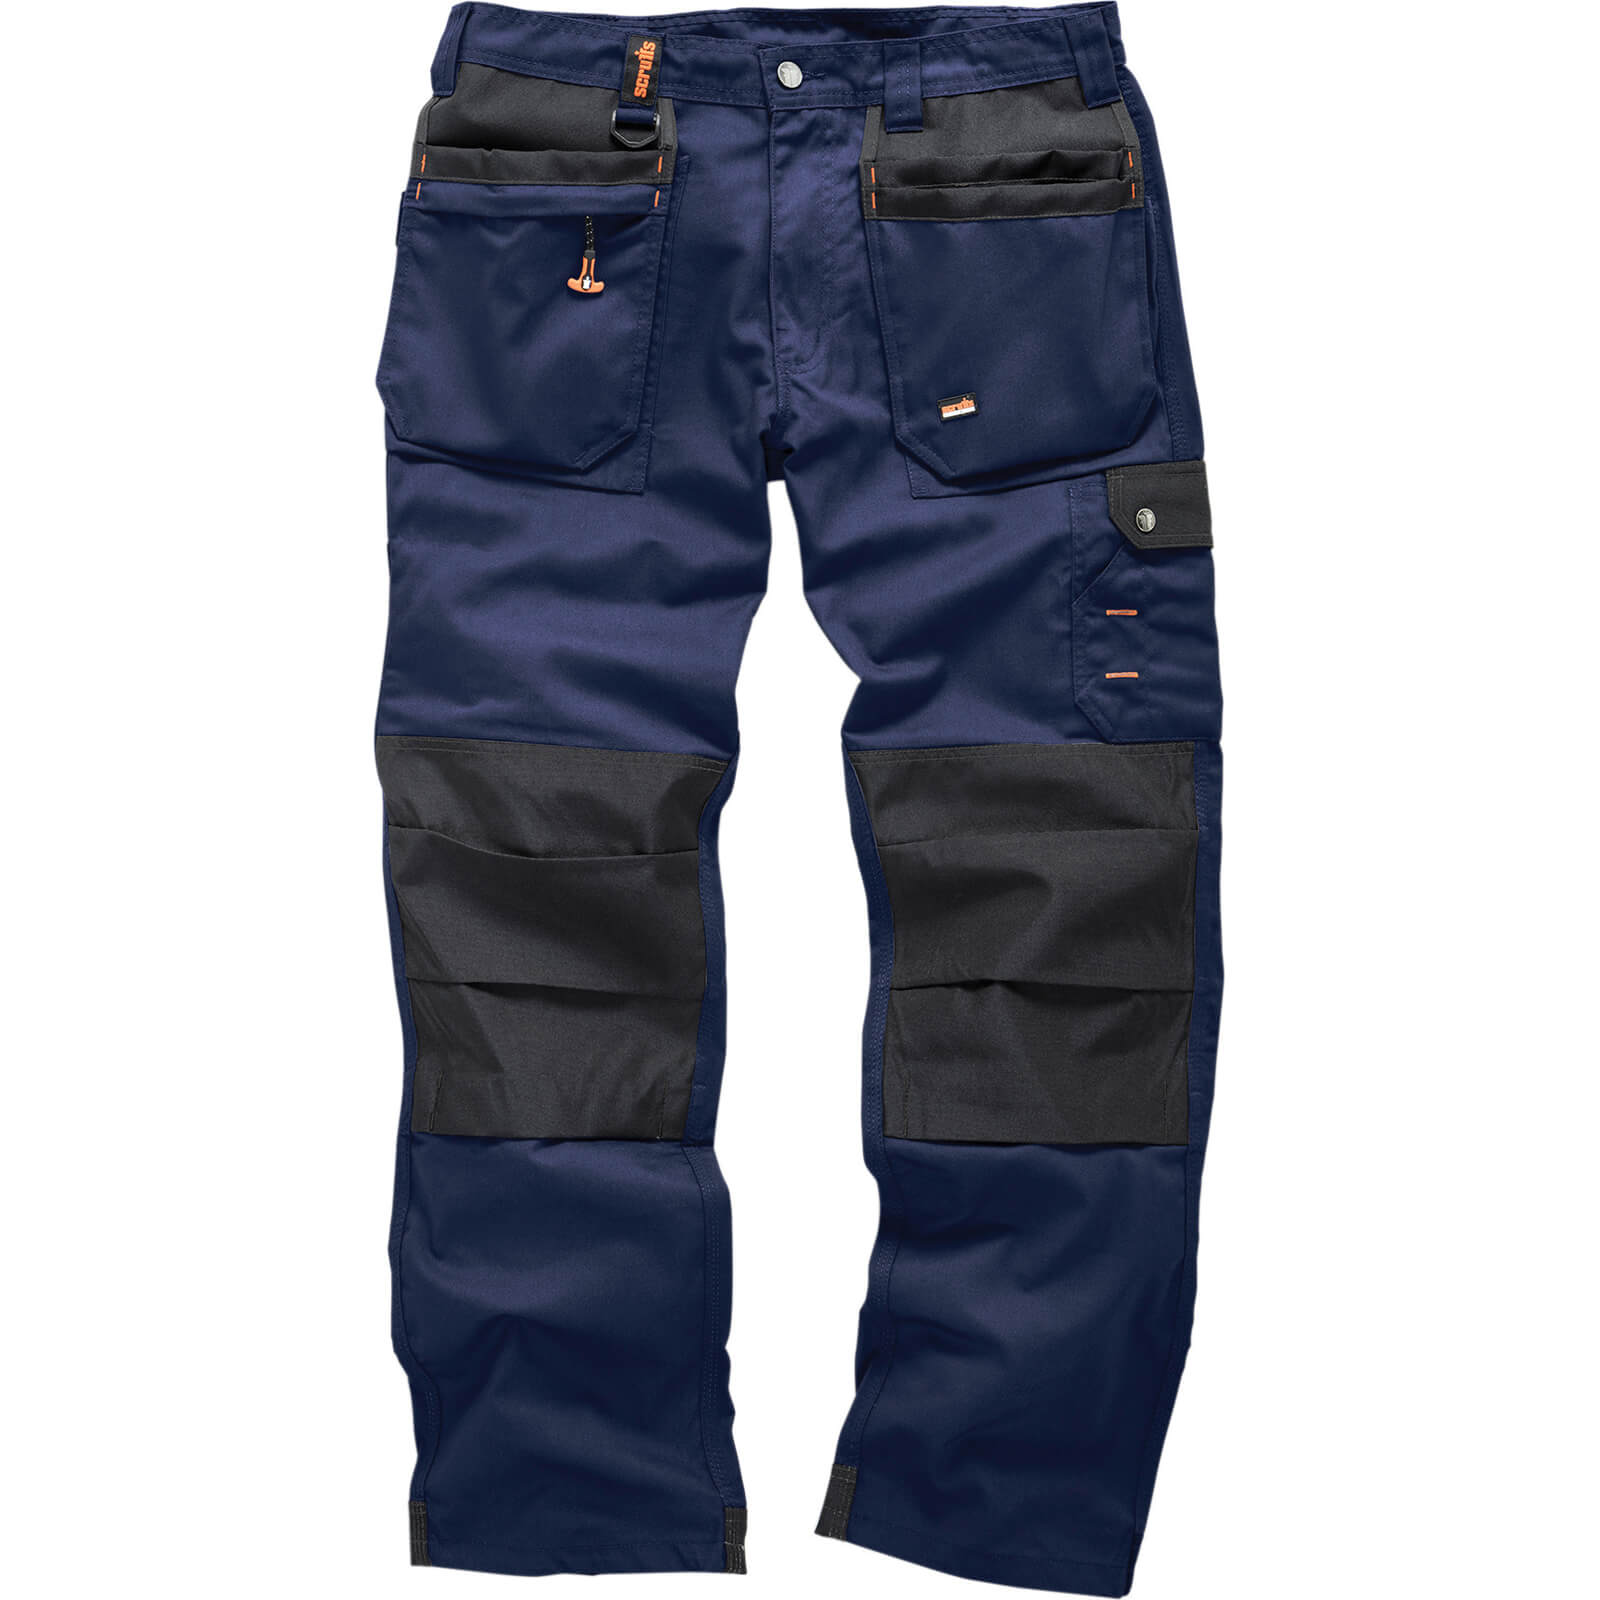 Image of Scruffs Worker Plus Trouser Navy 34" 34"